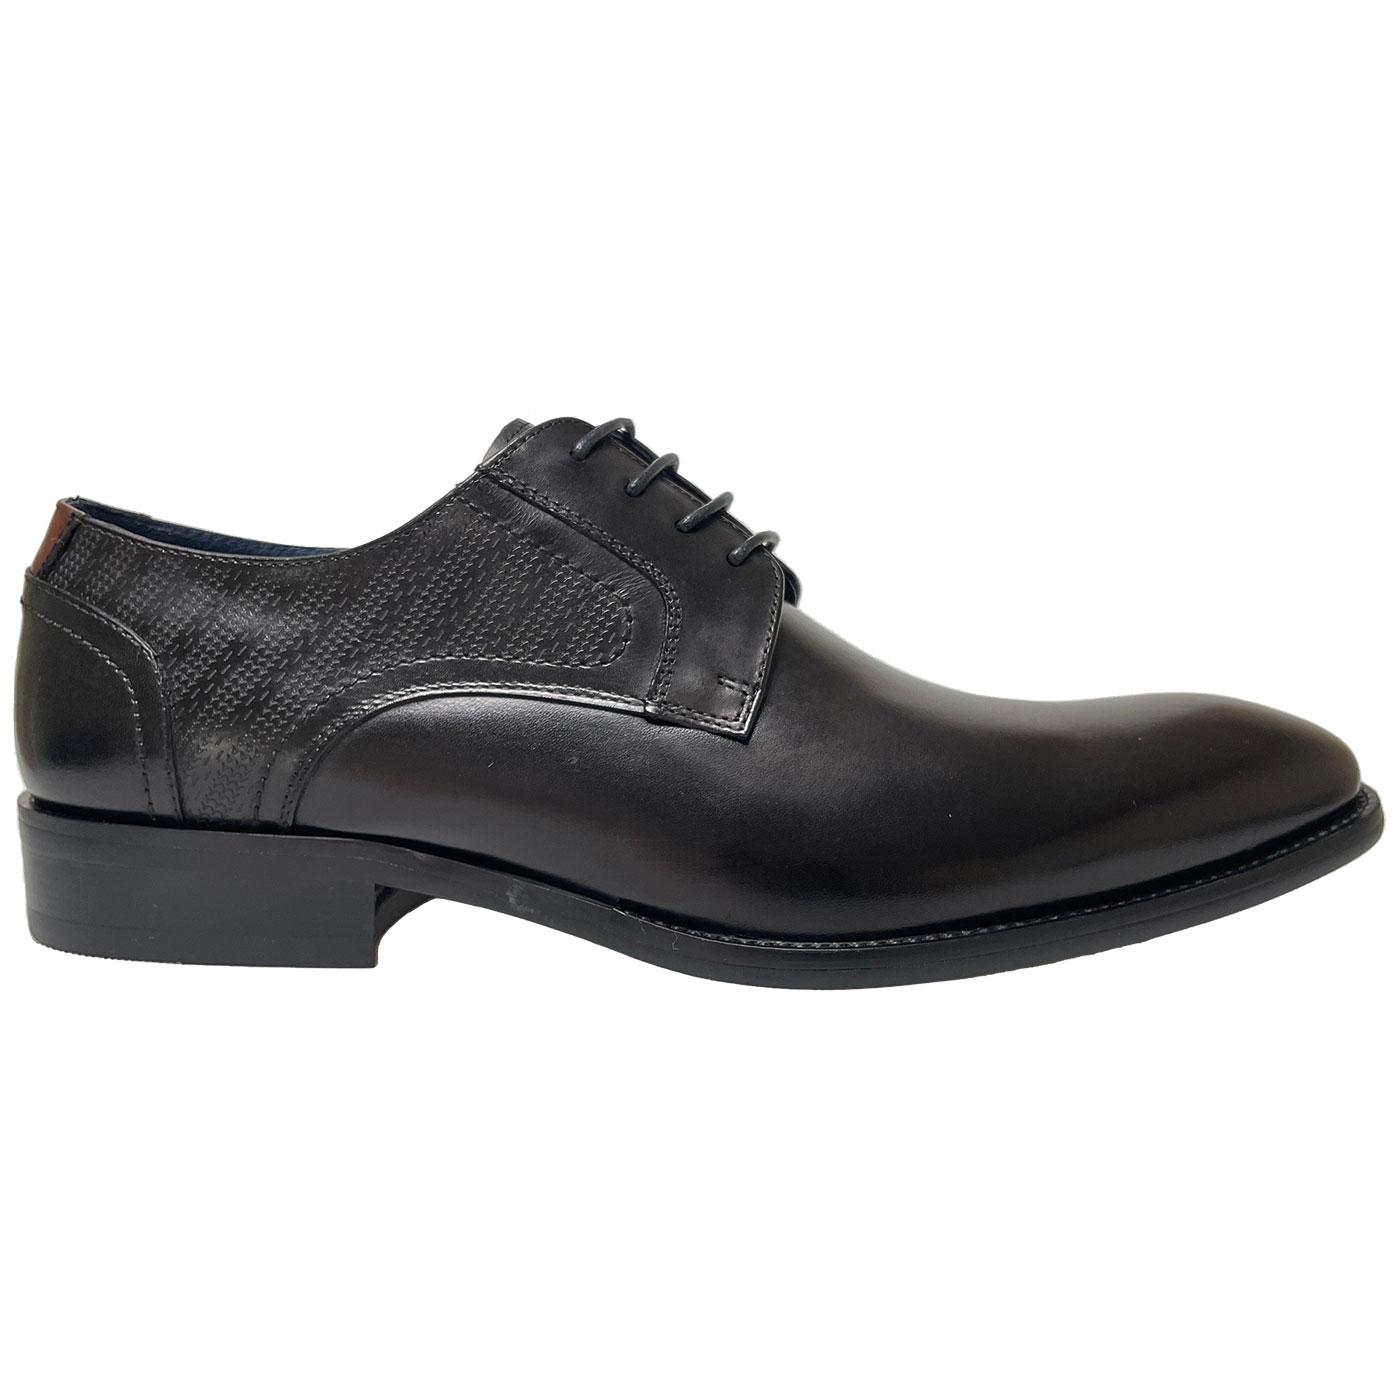 Melbury Paolo Vandini Black Leather Derby Shoes